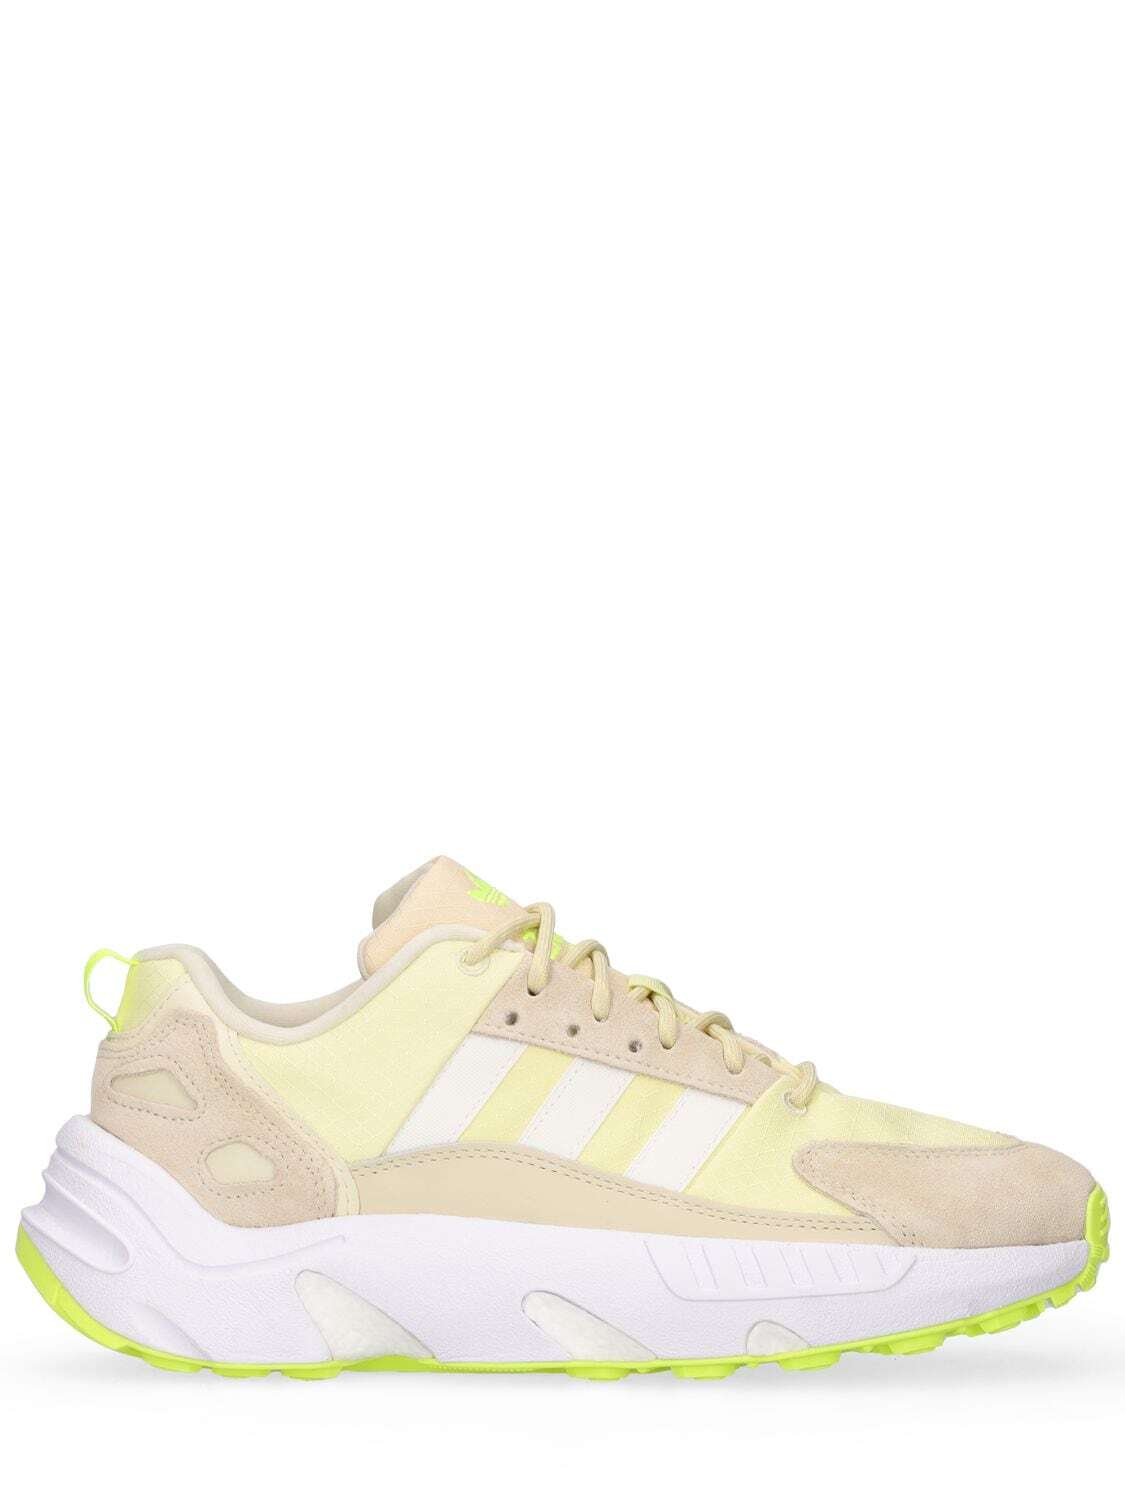 ADIDAS ORIGINALS Zx 22 Boost Sneakers in white / yellow